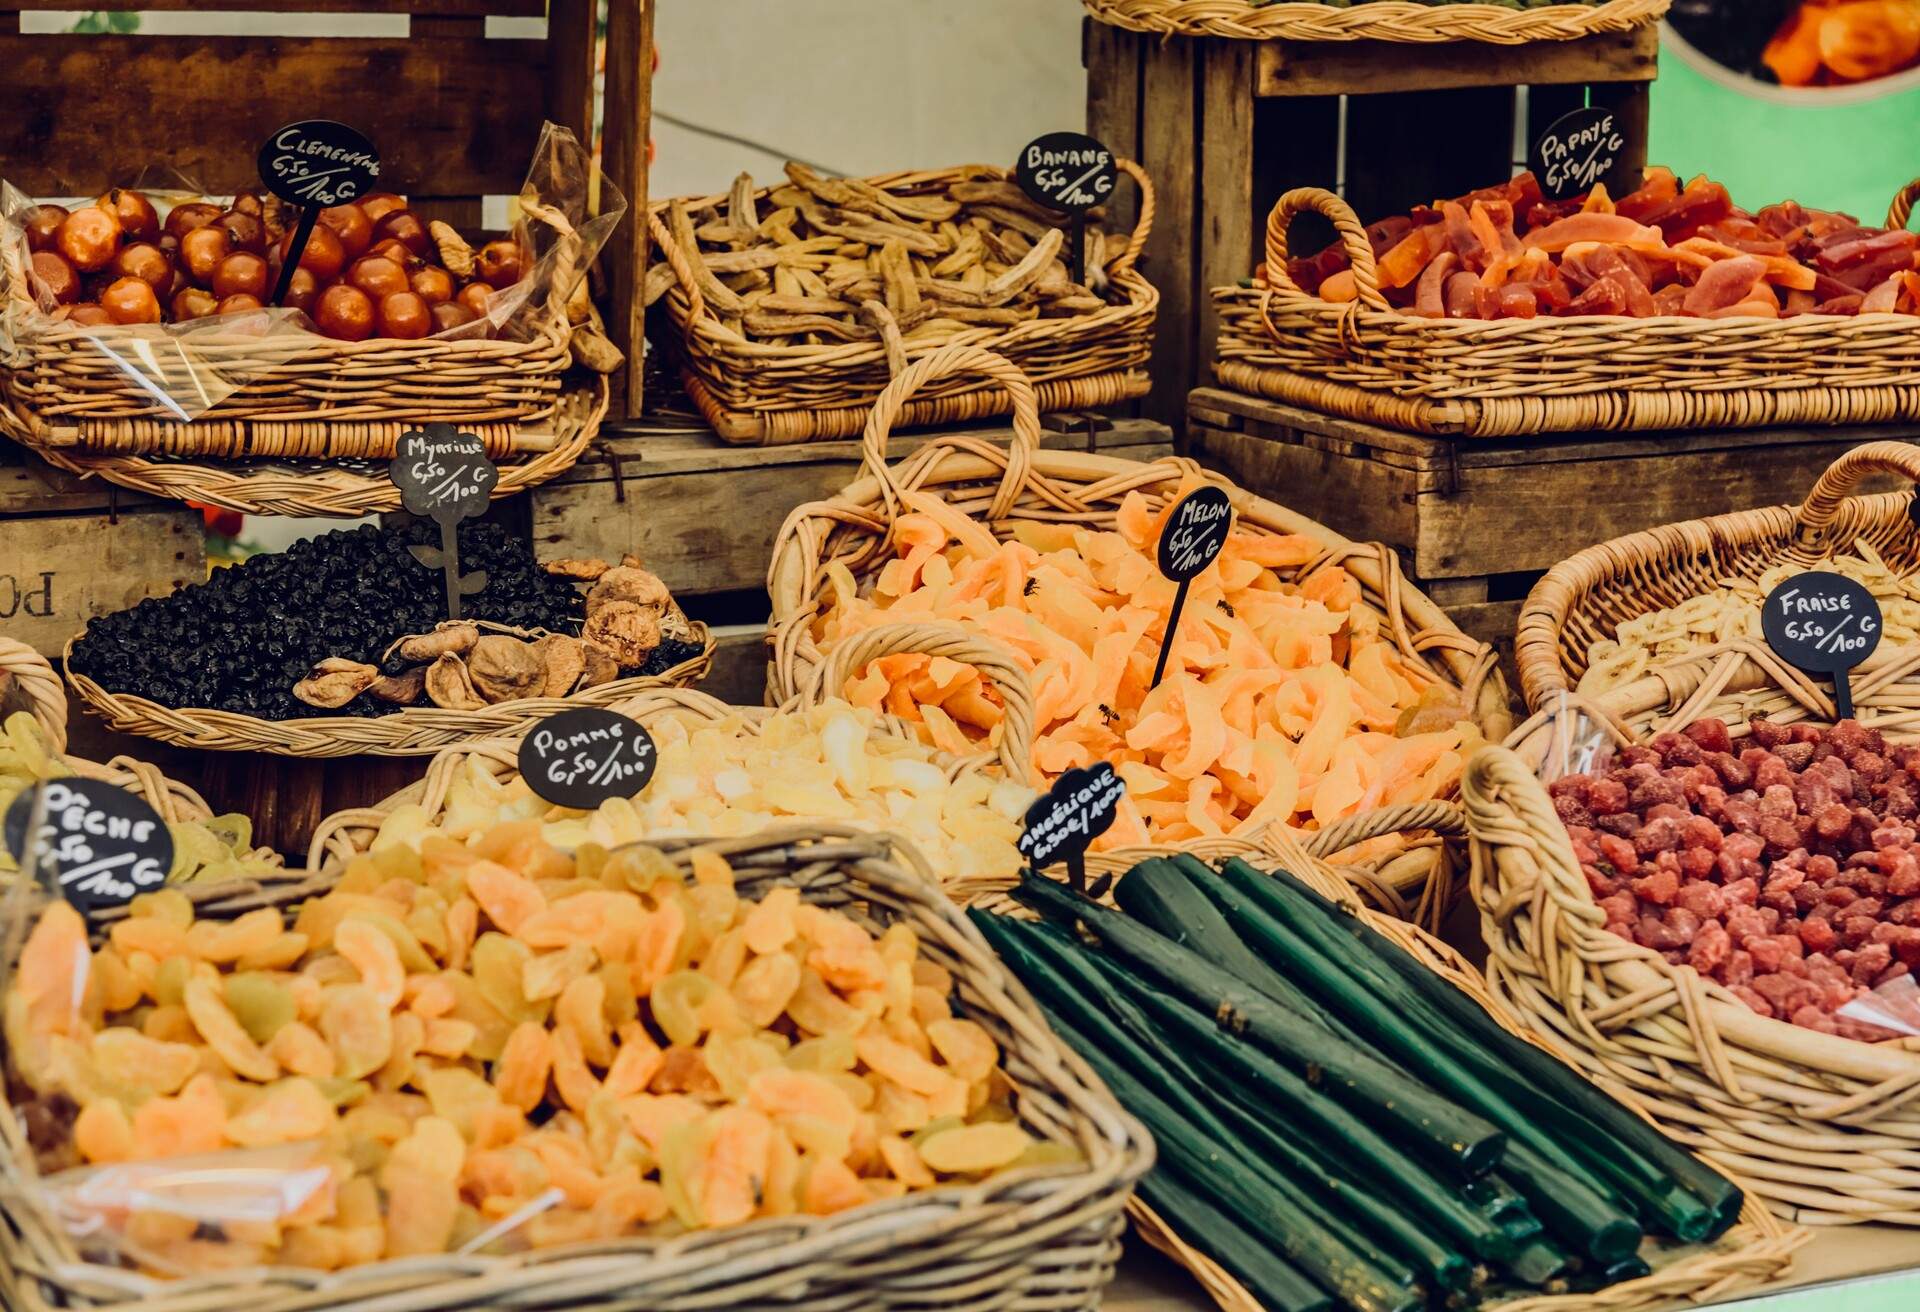 Dried fruits and vegetables displayed at food market in Paris, France